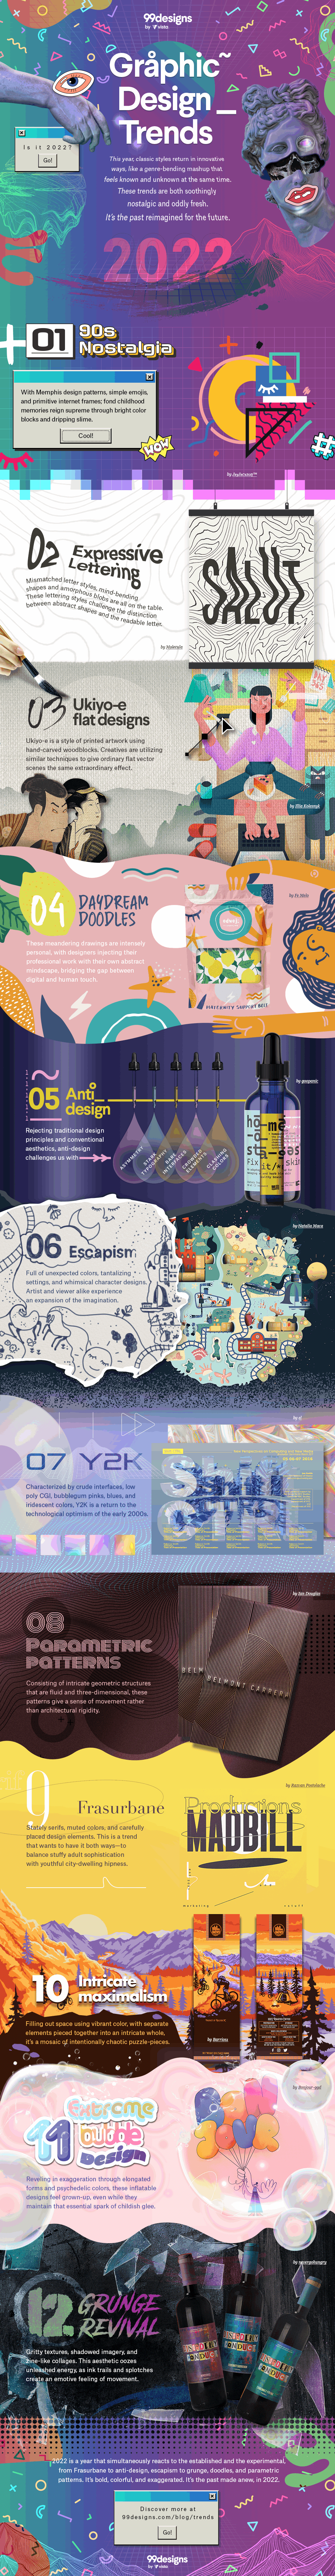 INFOGRAPHIC: Graphic design trends in 2022